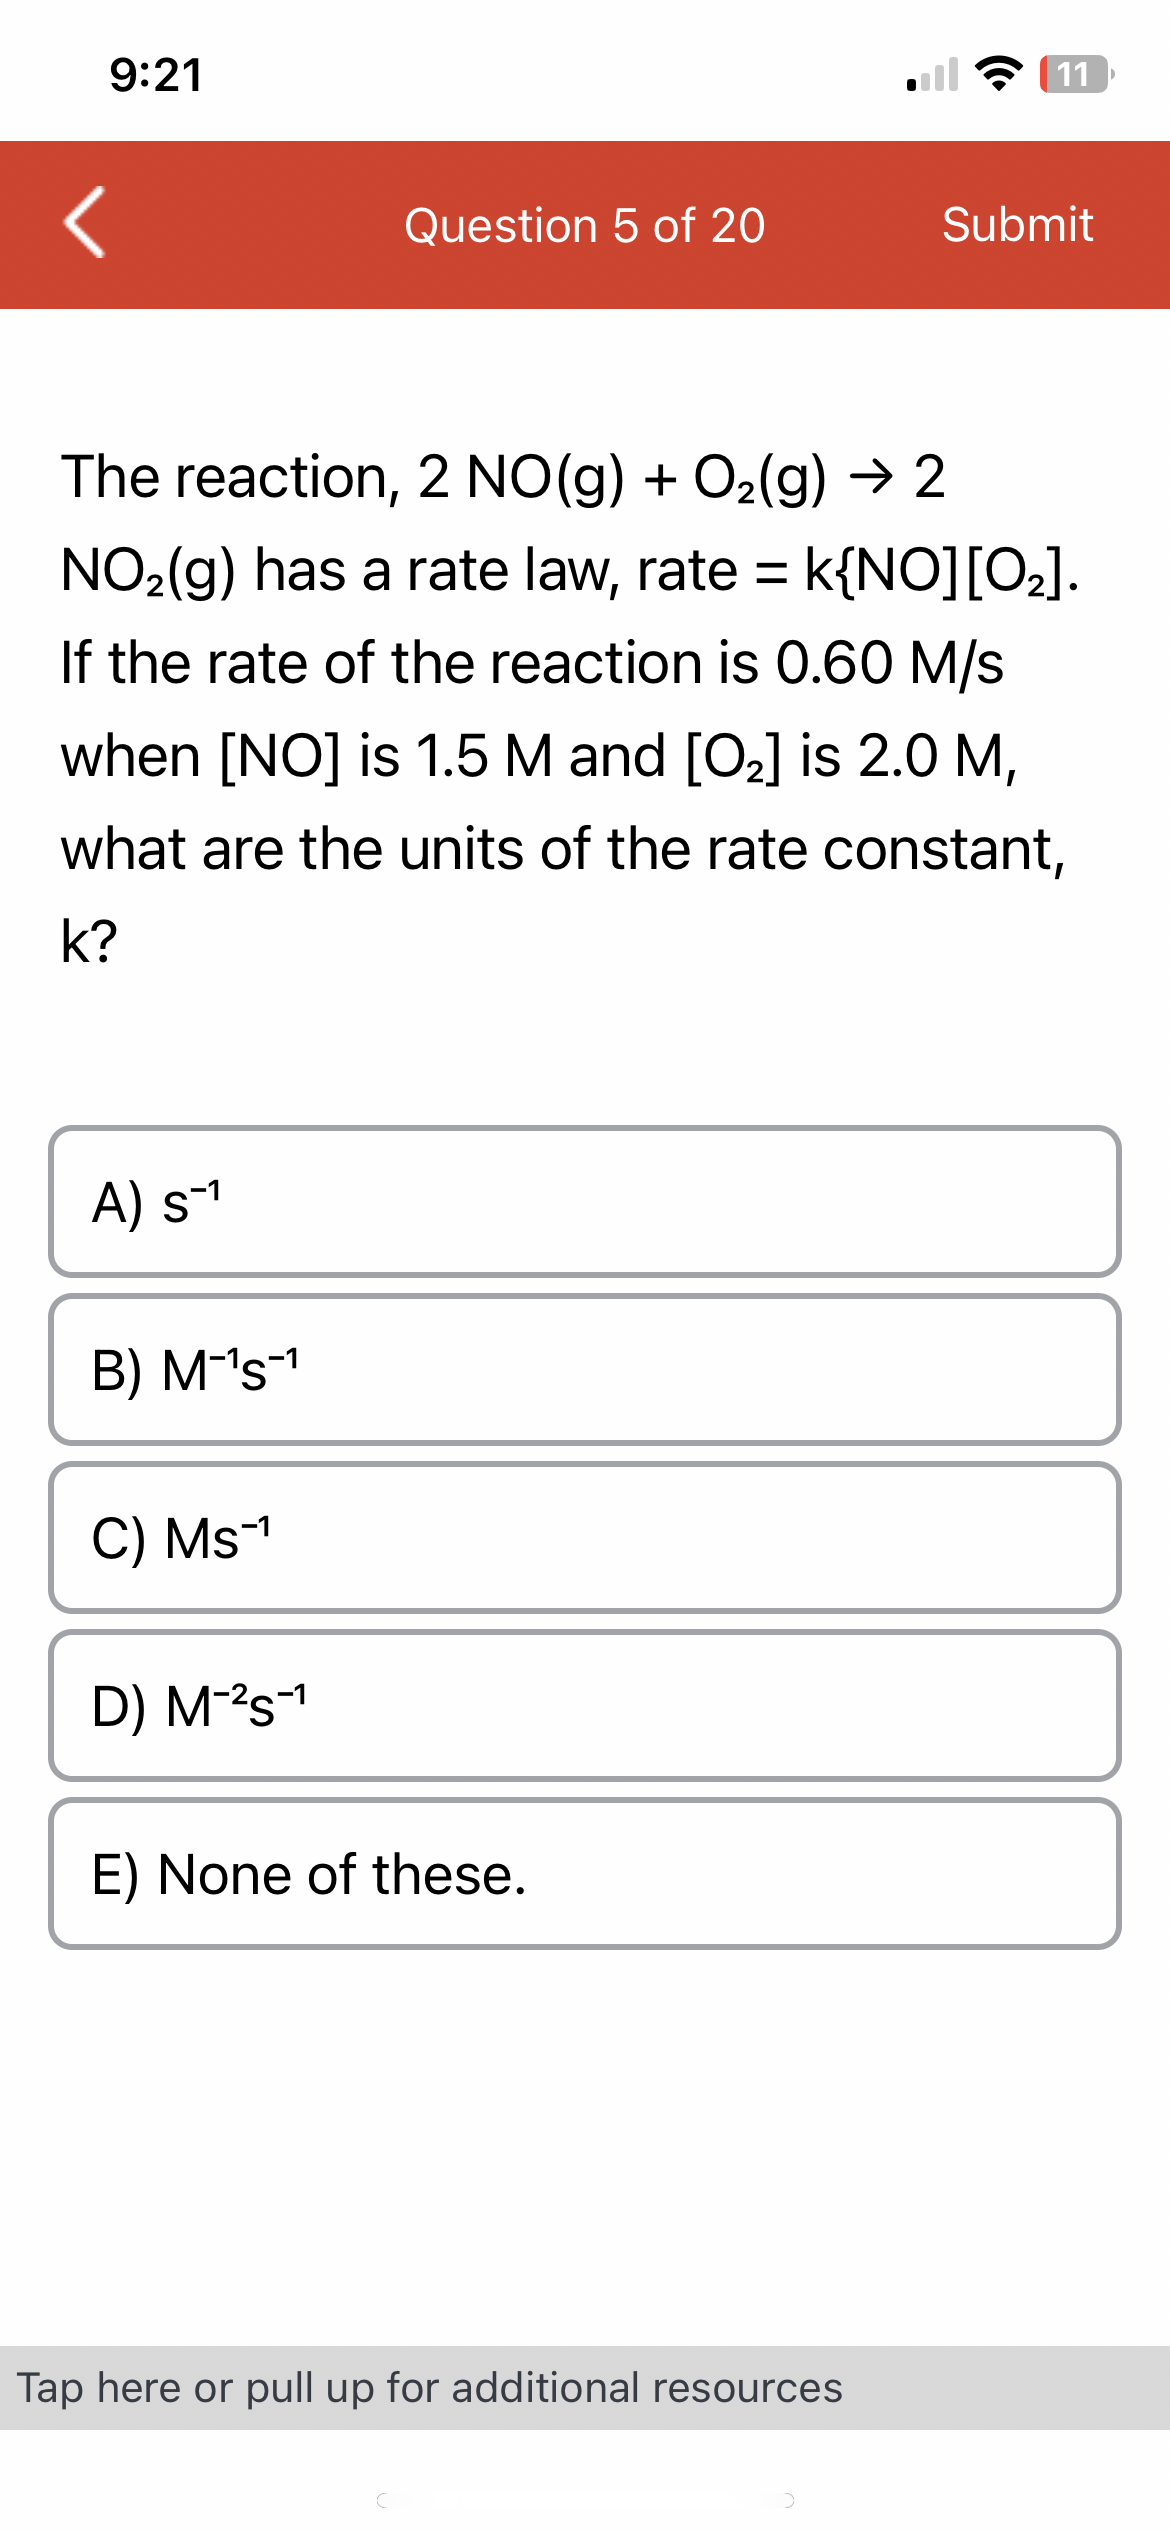 9:21
<
A) s-¹
B) M-¹s-¹
The reaction, 2 NO(g) + O₂(g) → 2
NO₂(g) has a rate law, rate = k{NO] [O₂].
If the rate of the reaction is 0.60 M/s
when [NO] is 1.5 M and [O₂] is 2.0 M,
what are the units of the rate constant,
k?
C) Ms-¹
Question 5 of 20
D) M-²S-¹
E) None of these.
11
Tap here or pull up for additional resources
Submit